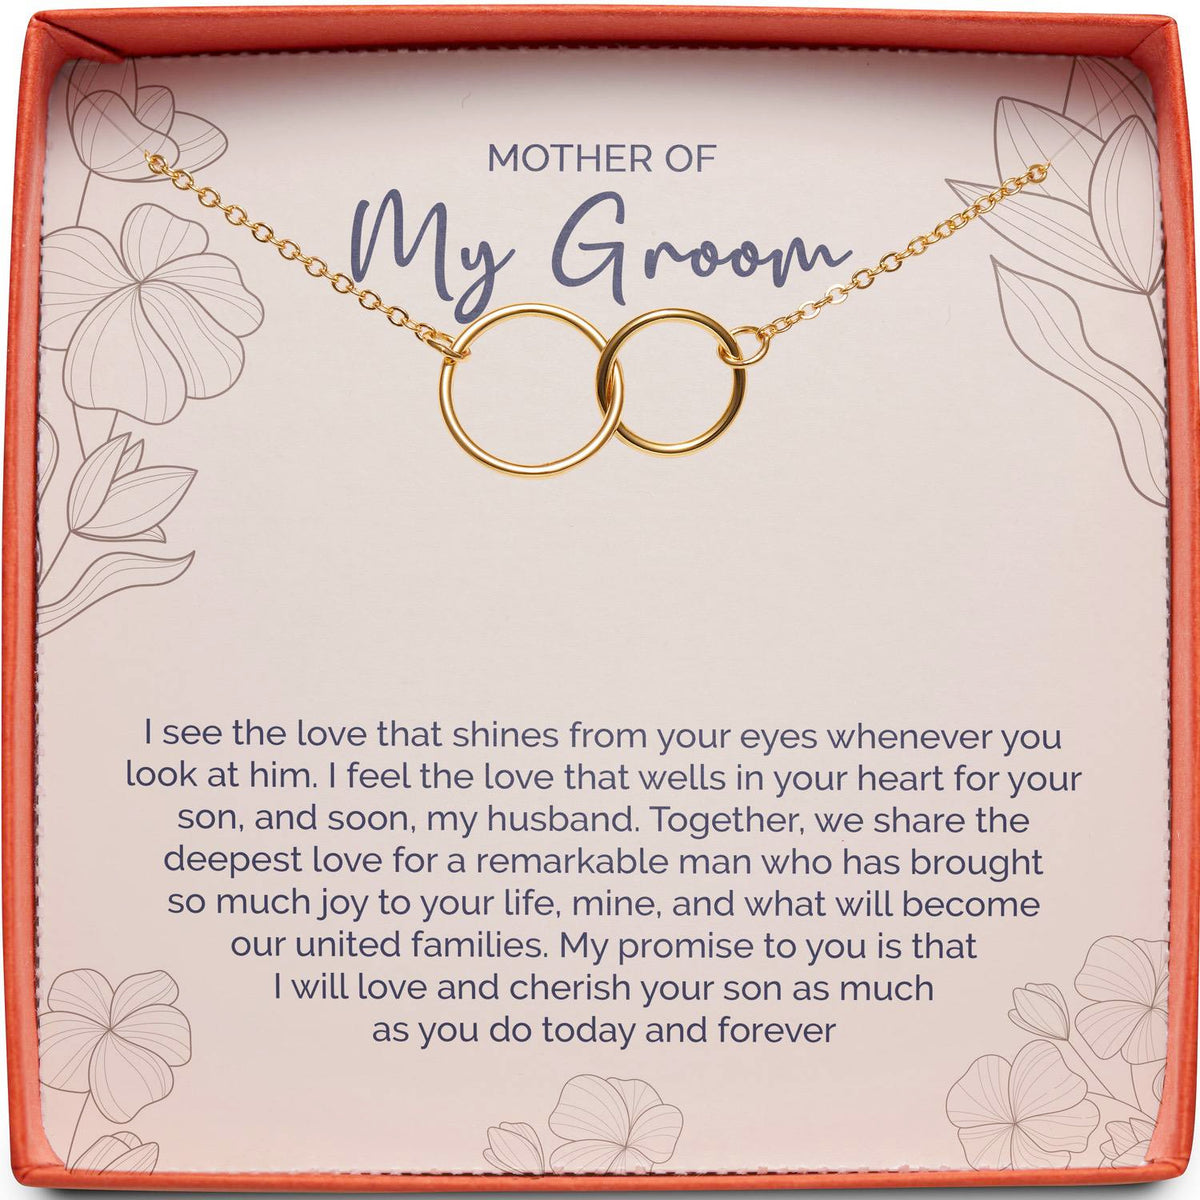 Mother of My Groom (From Bride) | Cherish Your Son | Interlocking Circles